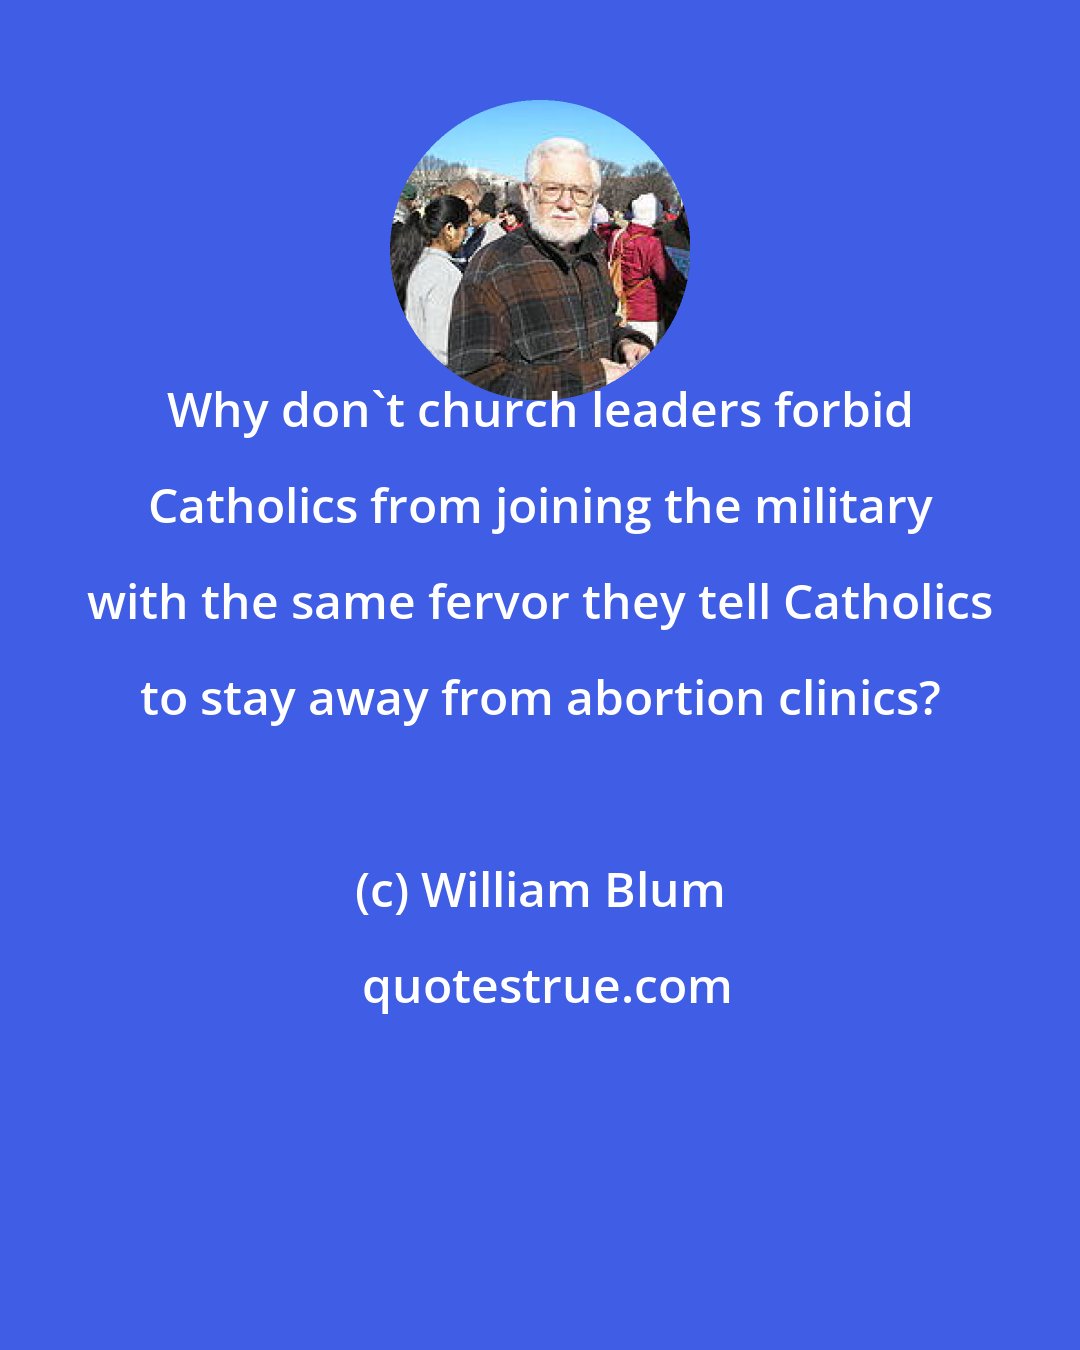 William Blum: Why don't church leaders forbid Catholics from joining the military with the same fervor they tell Catholics to stay away from abortion clinics?